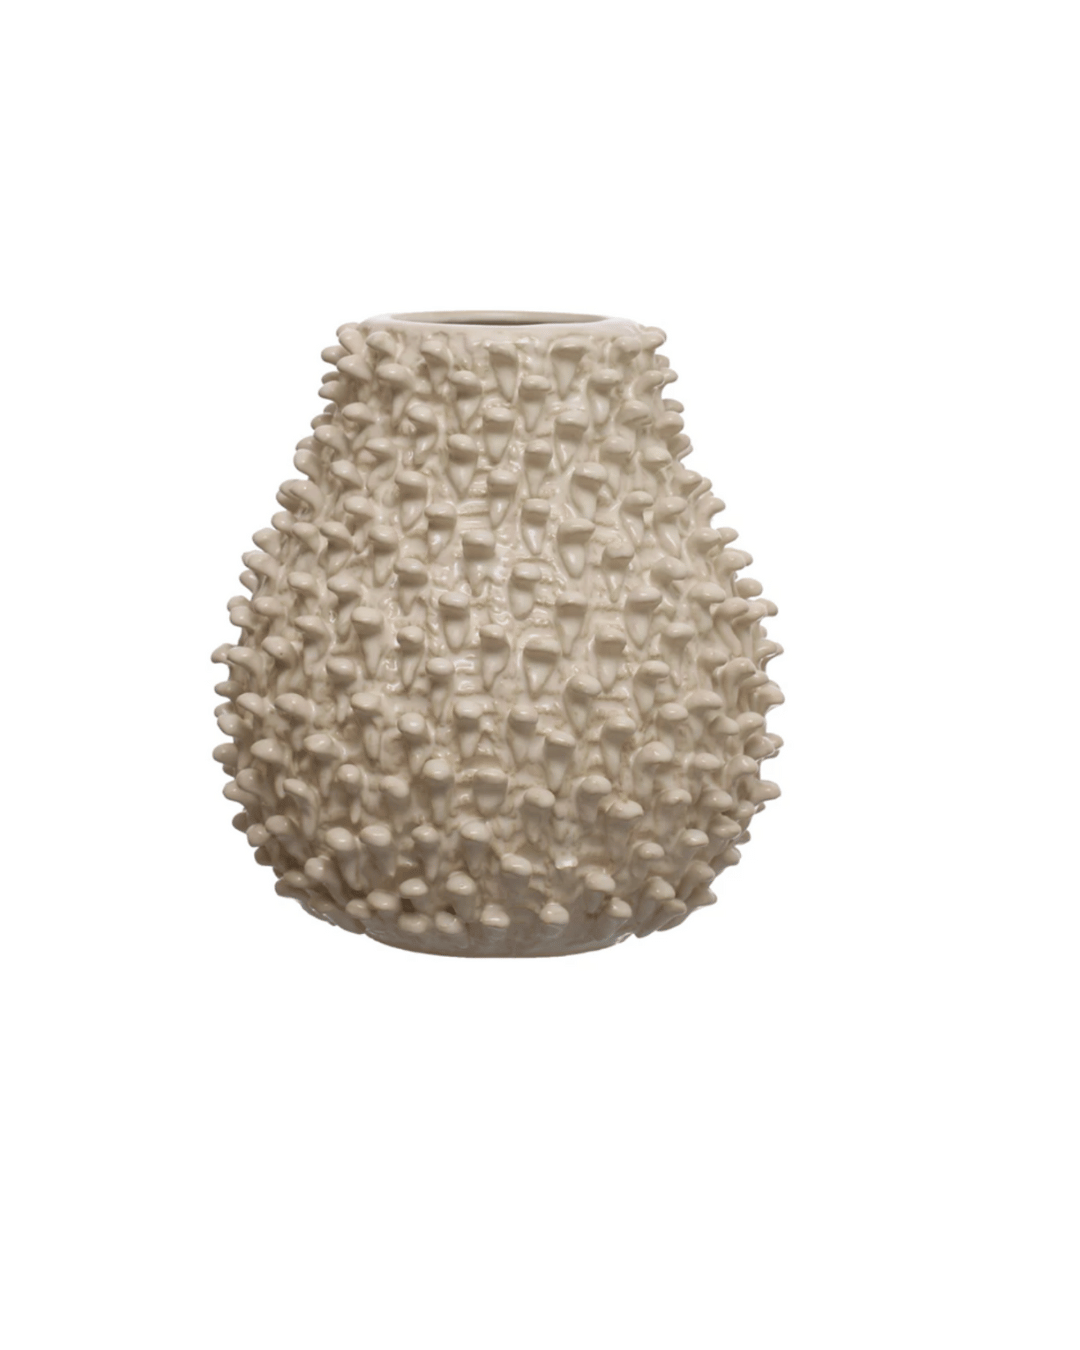 A textured ceramic Embossed Vase Cream with a distinctive, spiky surface design, inspired by Scottsdale Arizona aesthetics, presented on a plain white background by Creative Co-op.